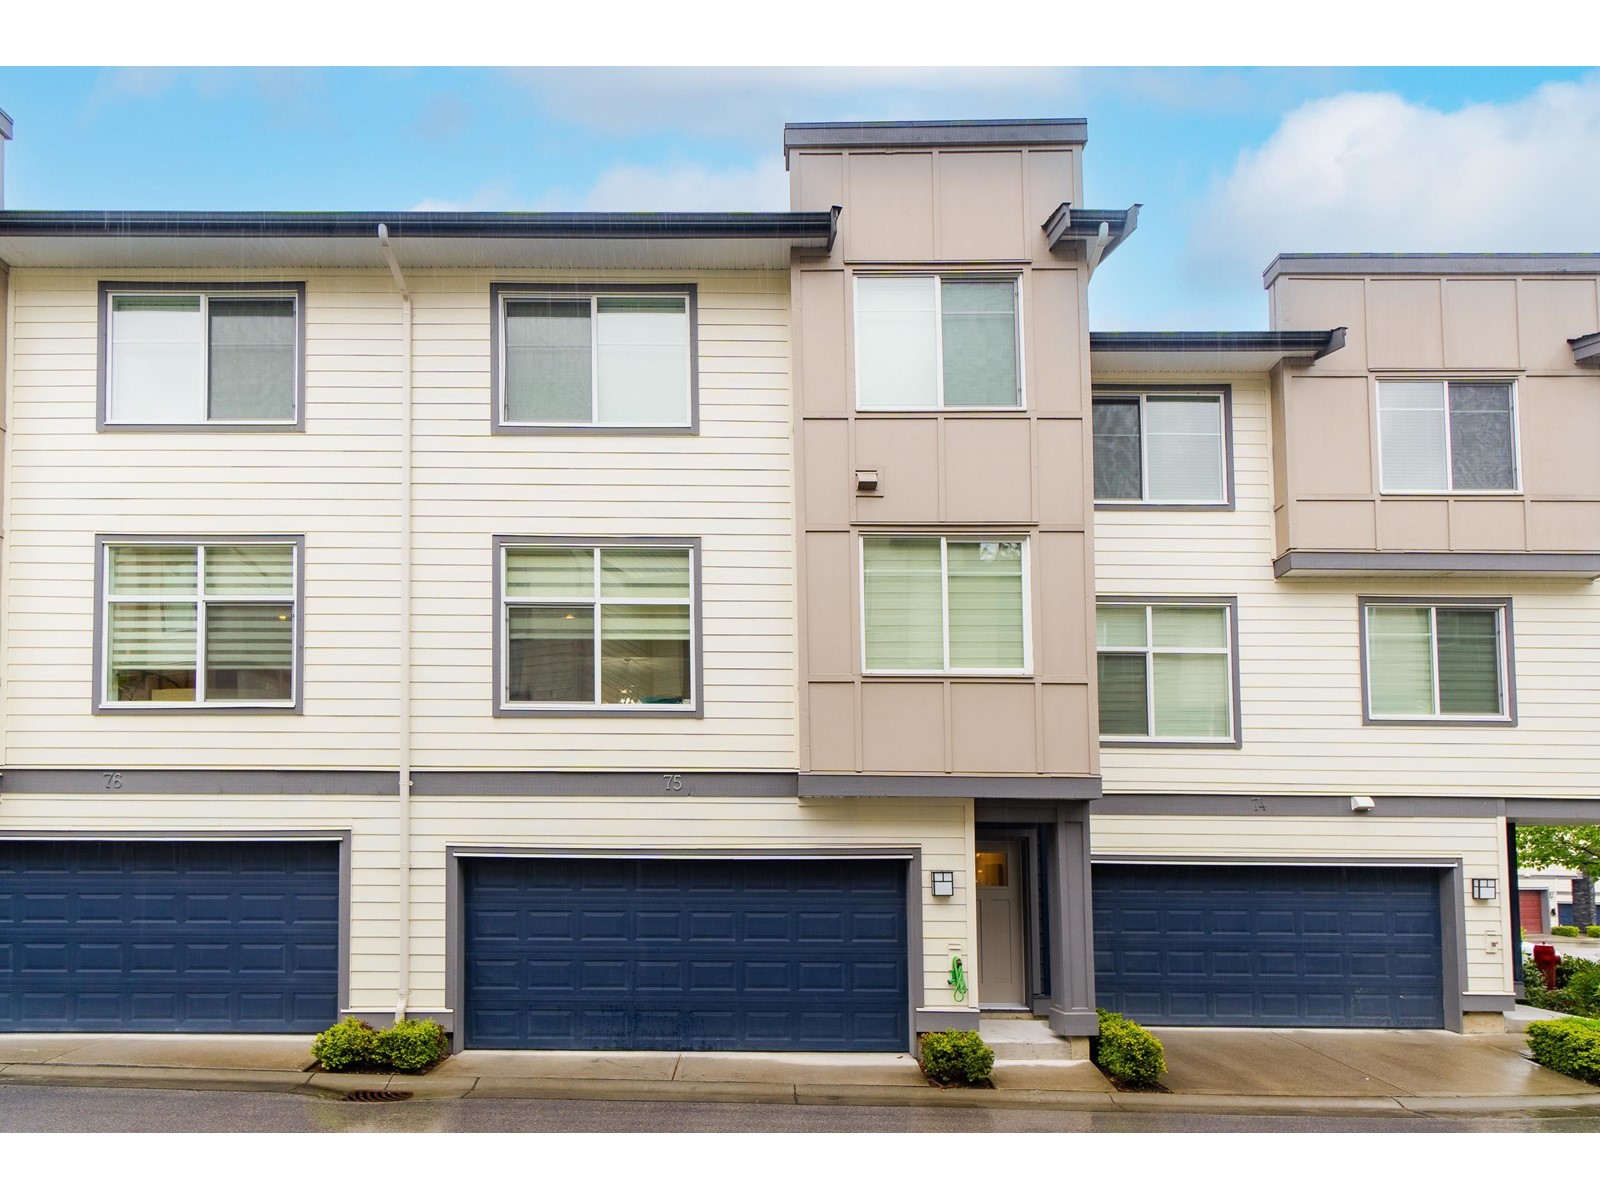 4 Bedroom Townhouse For Sale | 75 15665 Mountain View Drive | Surrey | V3Z0W8